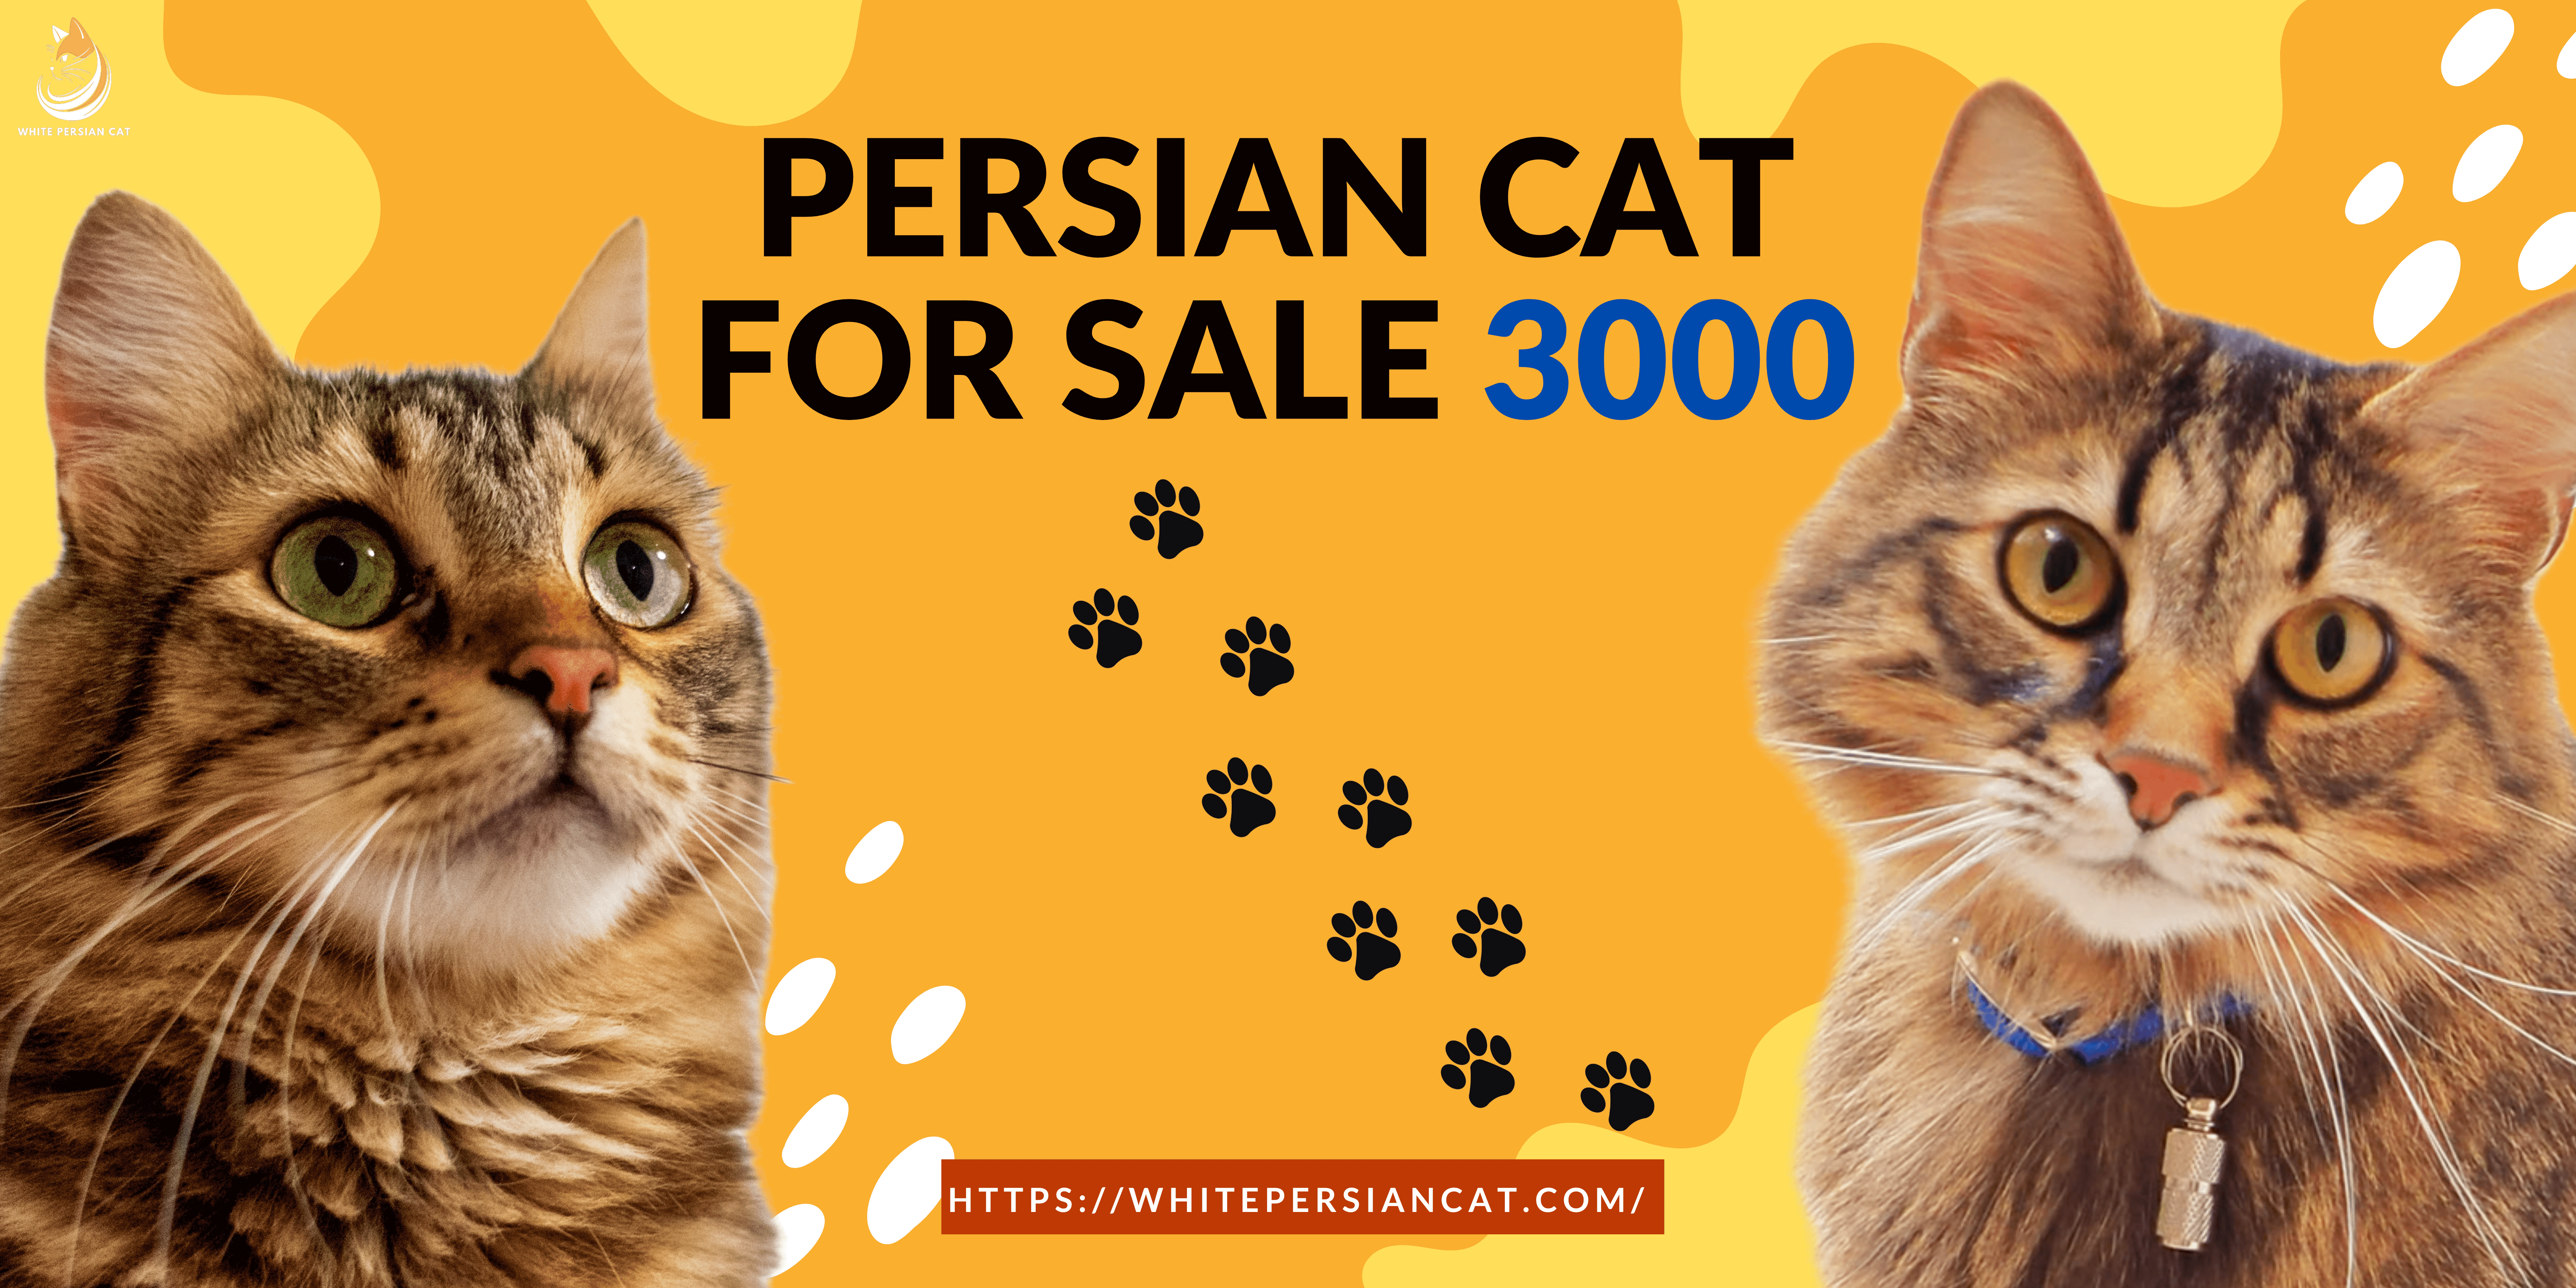 Persian Cat for Sale 3000